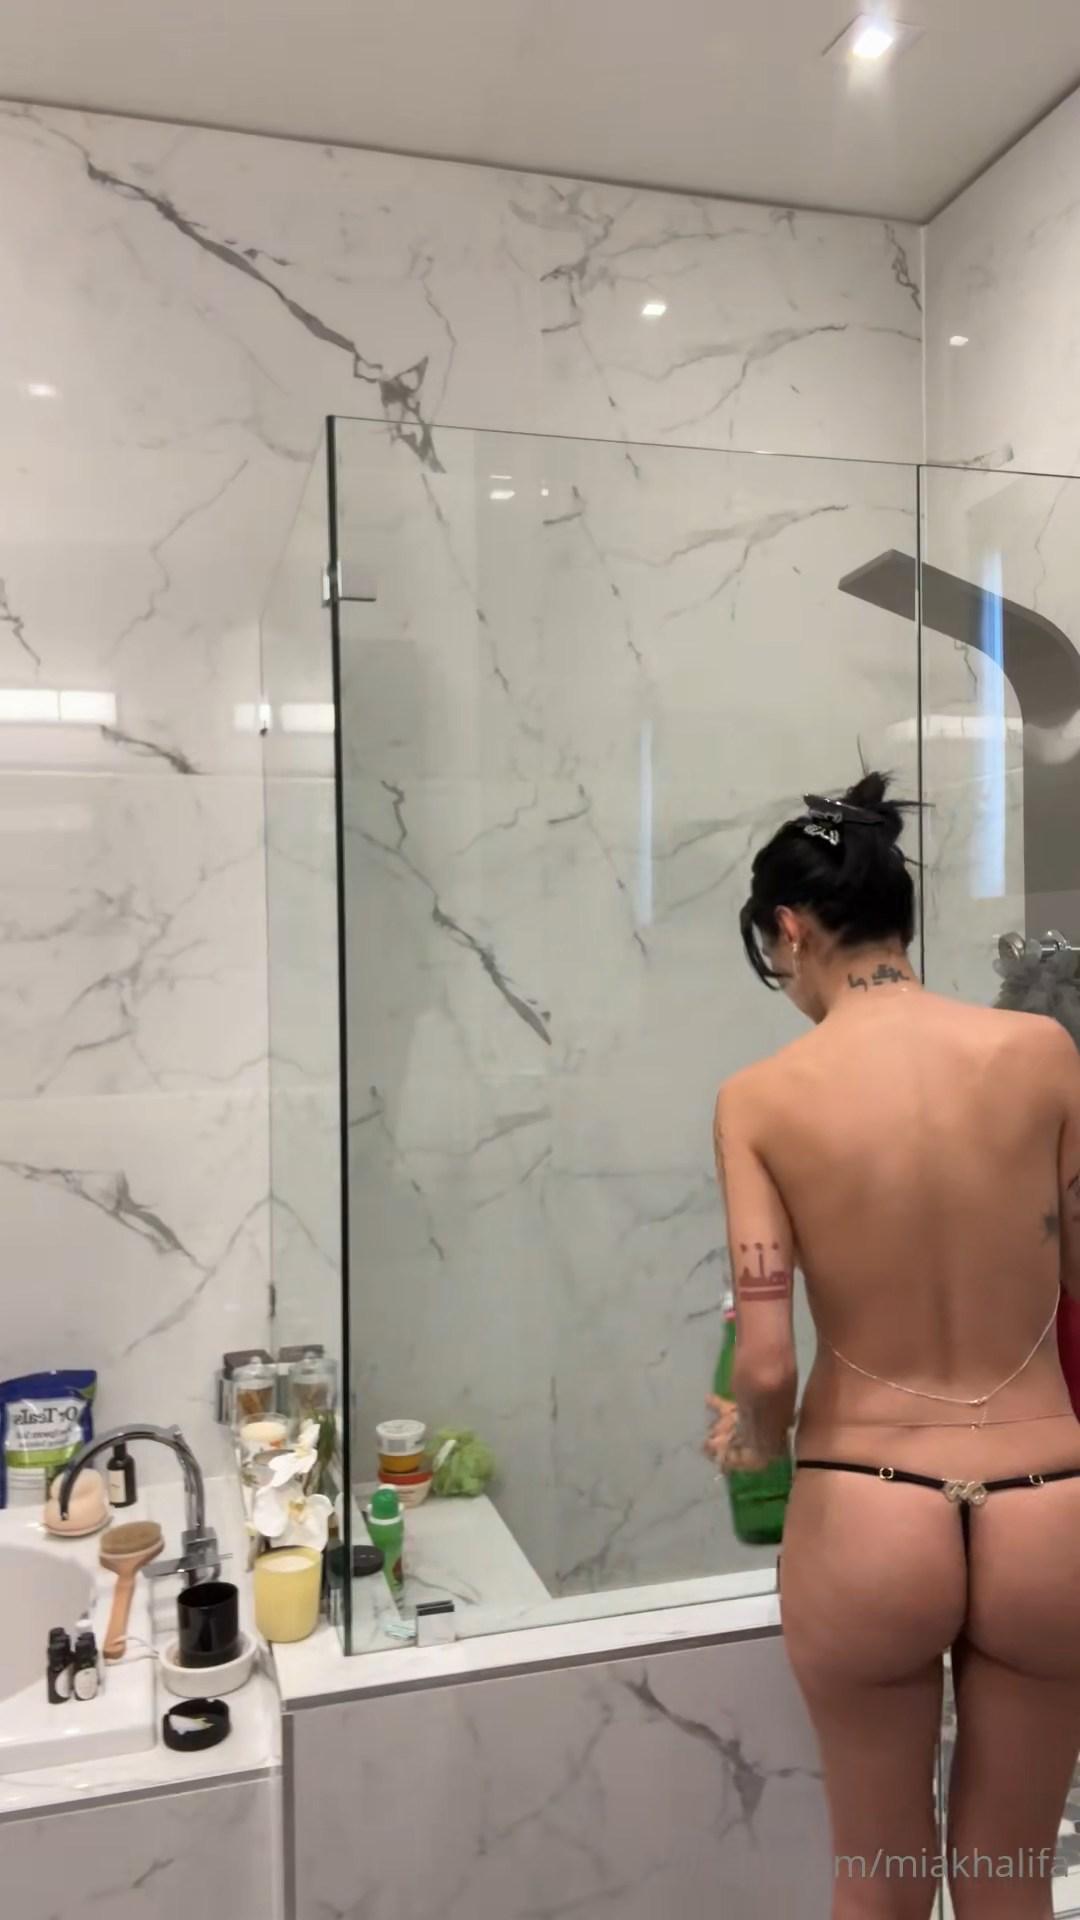 mia khalifa nude shower prep part 2 onlyfans video leaked rwessb